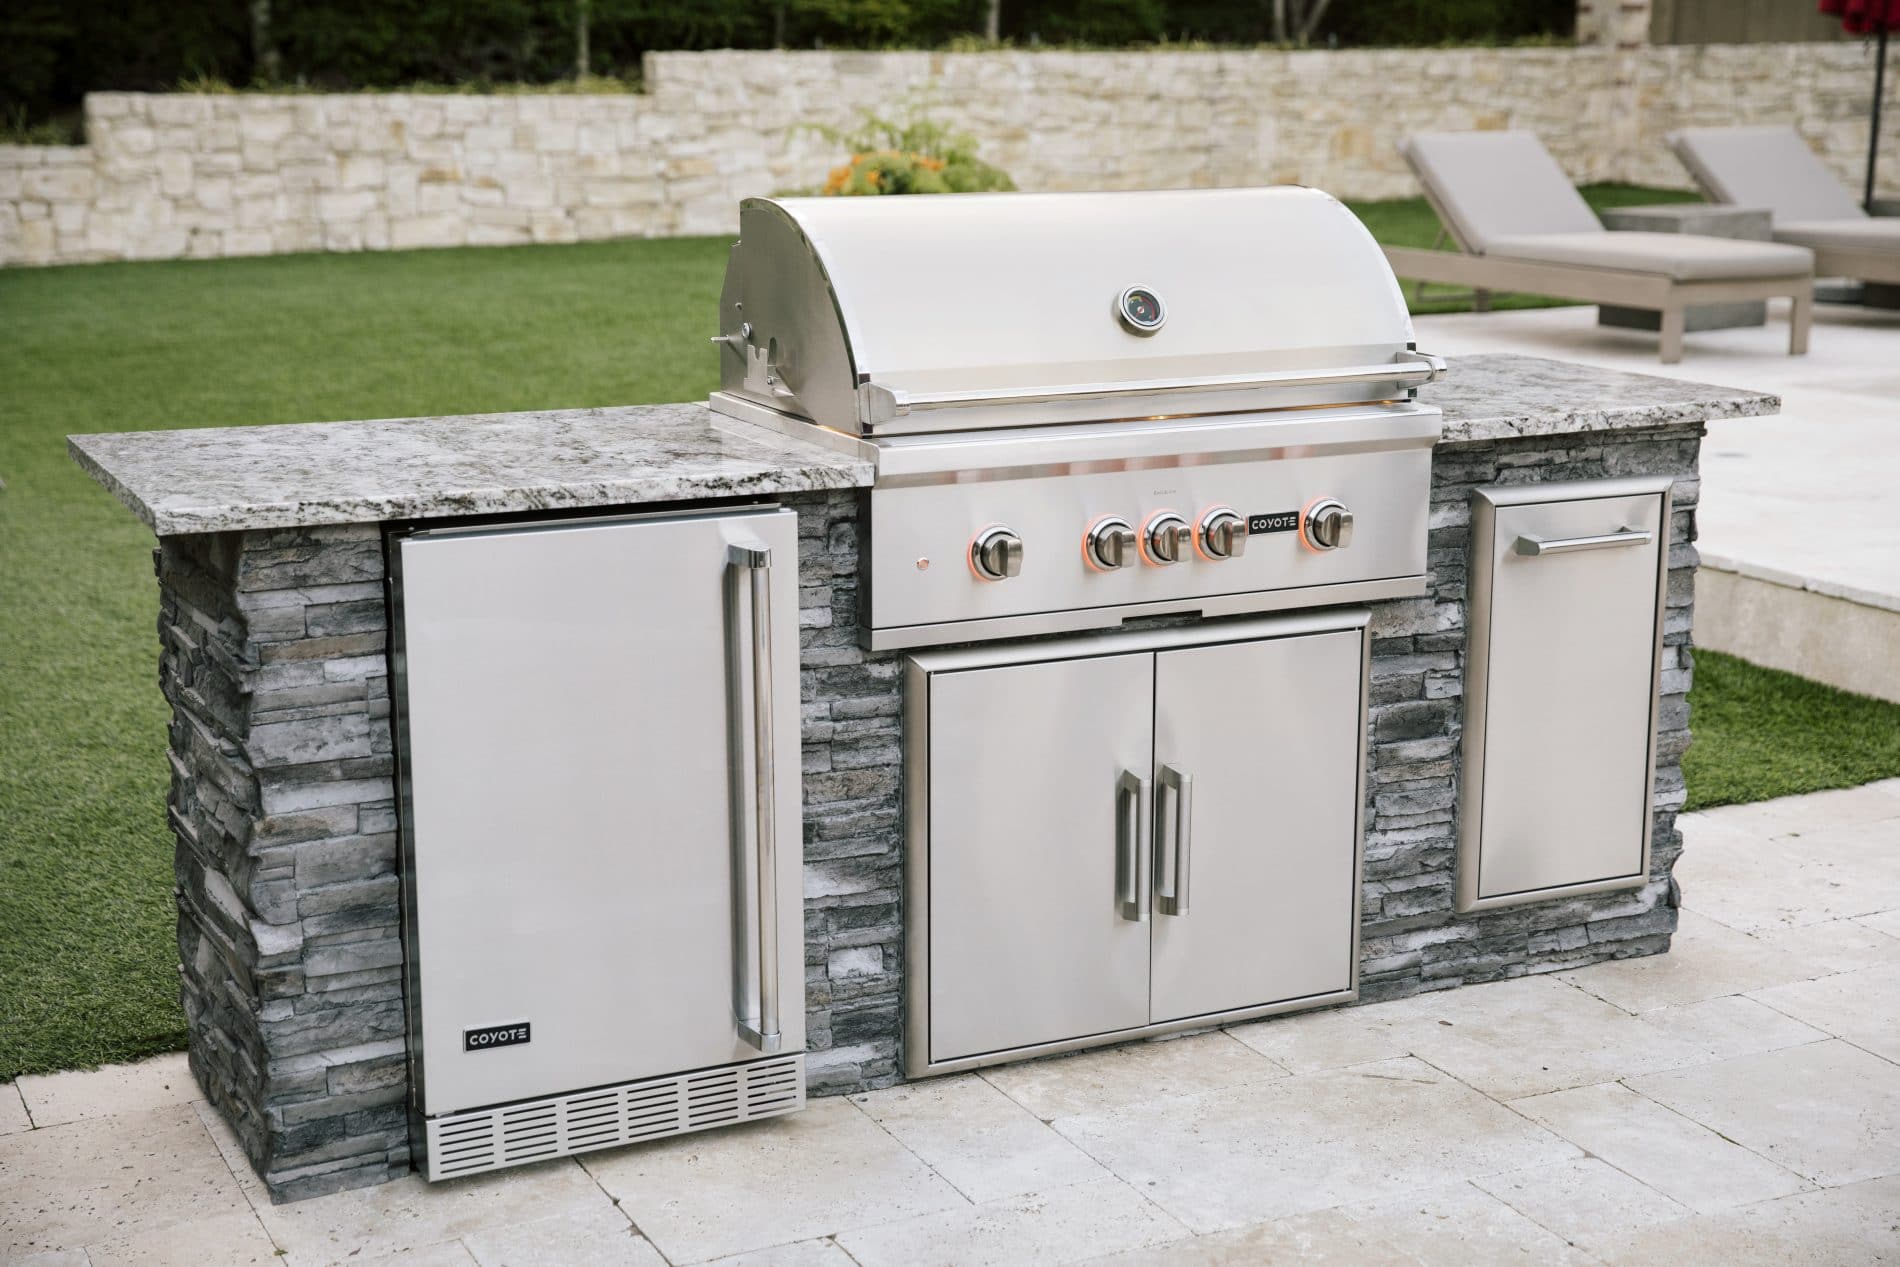 Create Outdoor Kitchen Designs in 20 Easy Steps   Coyote Outdoor Living